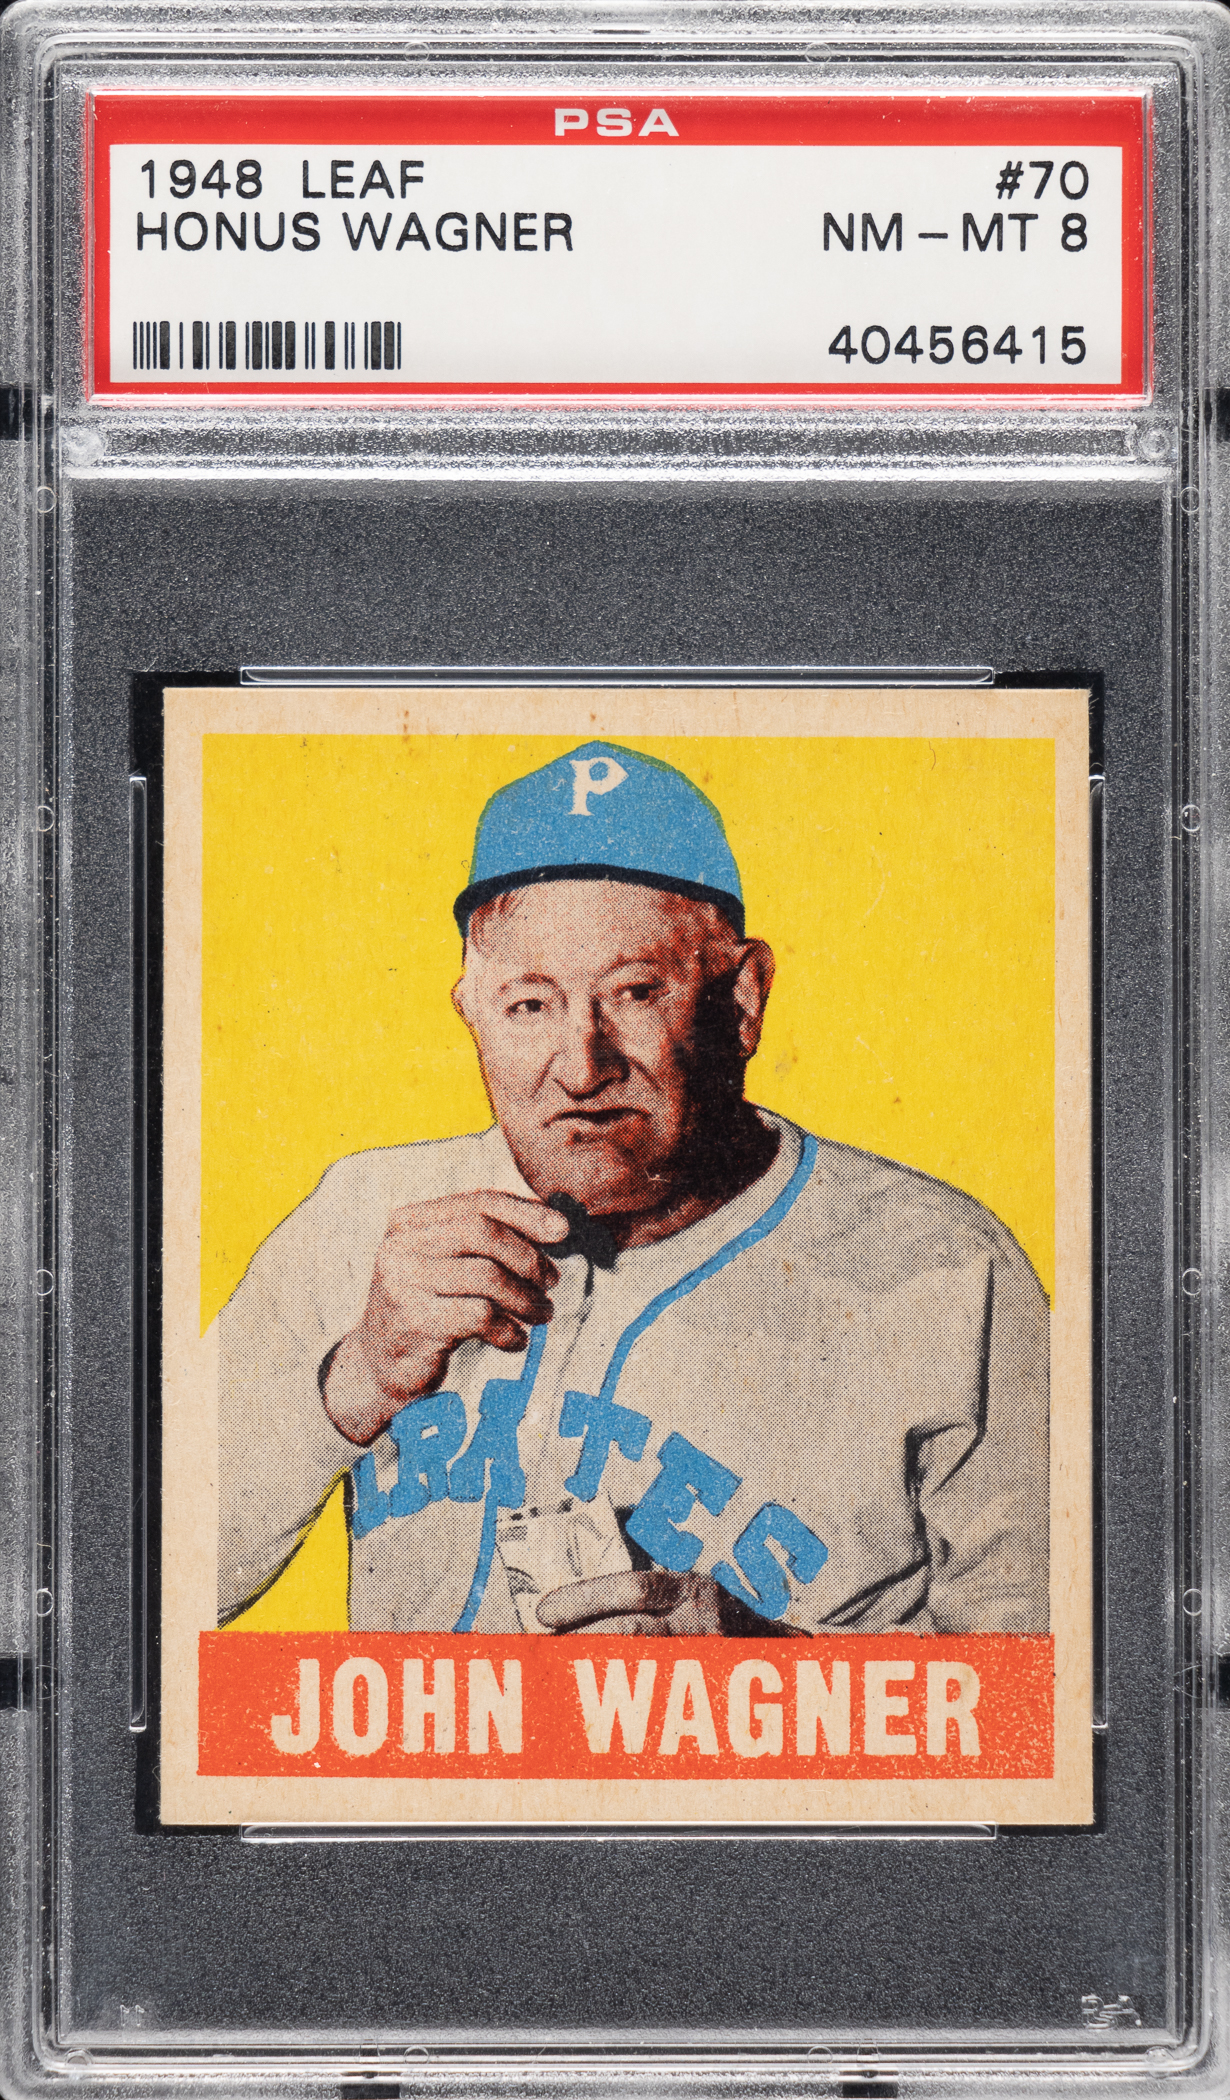 The 1948-1949 Leaf Honus Wagner #70 card is a tribute to the Pirates legend while he was serving as a coach